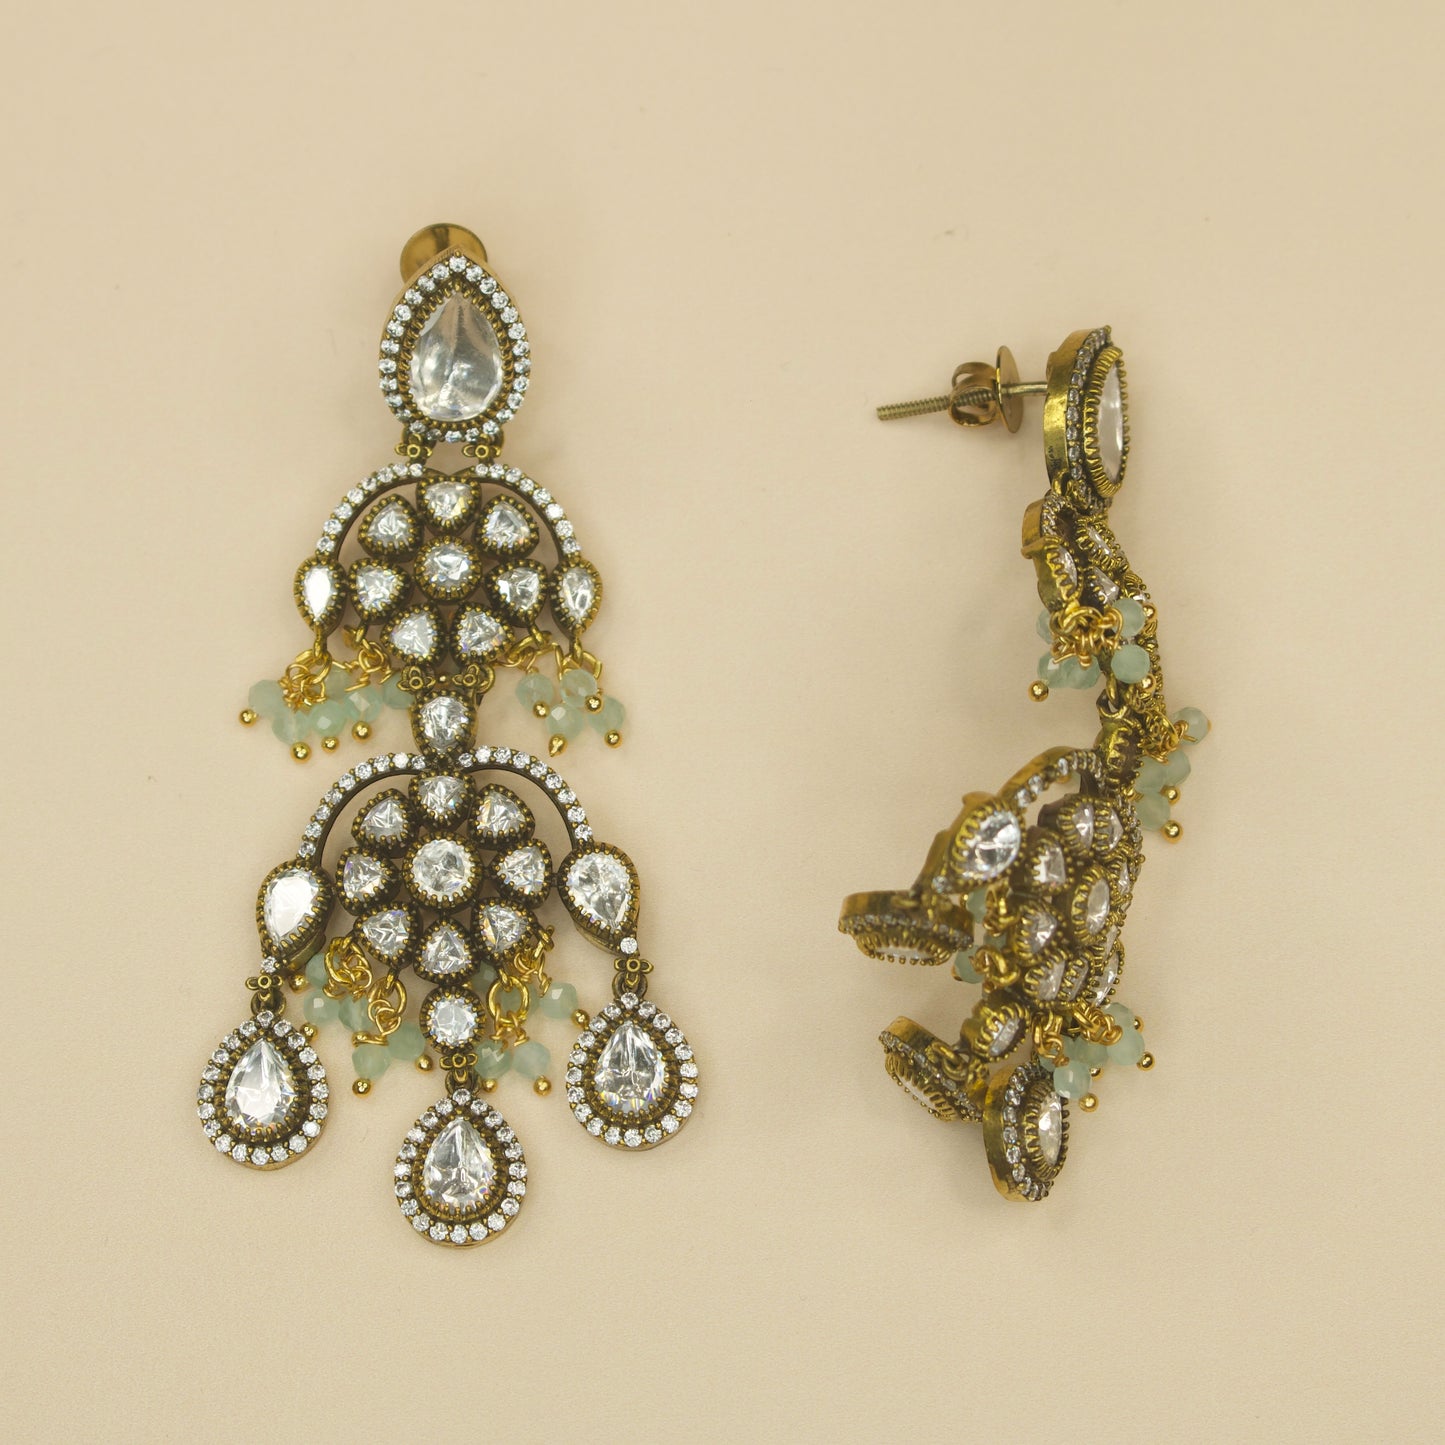 Designer Victorian Floral Earrings with screw-back